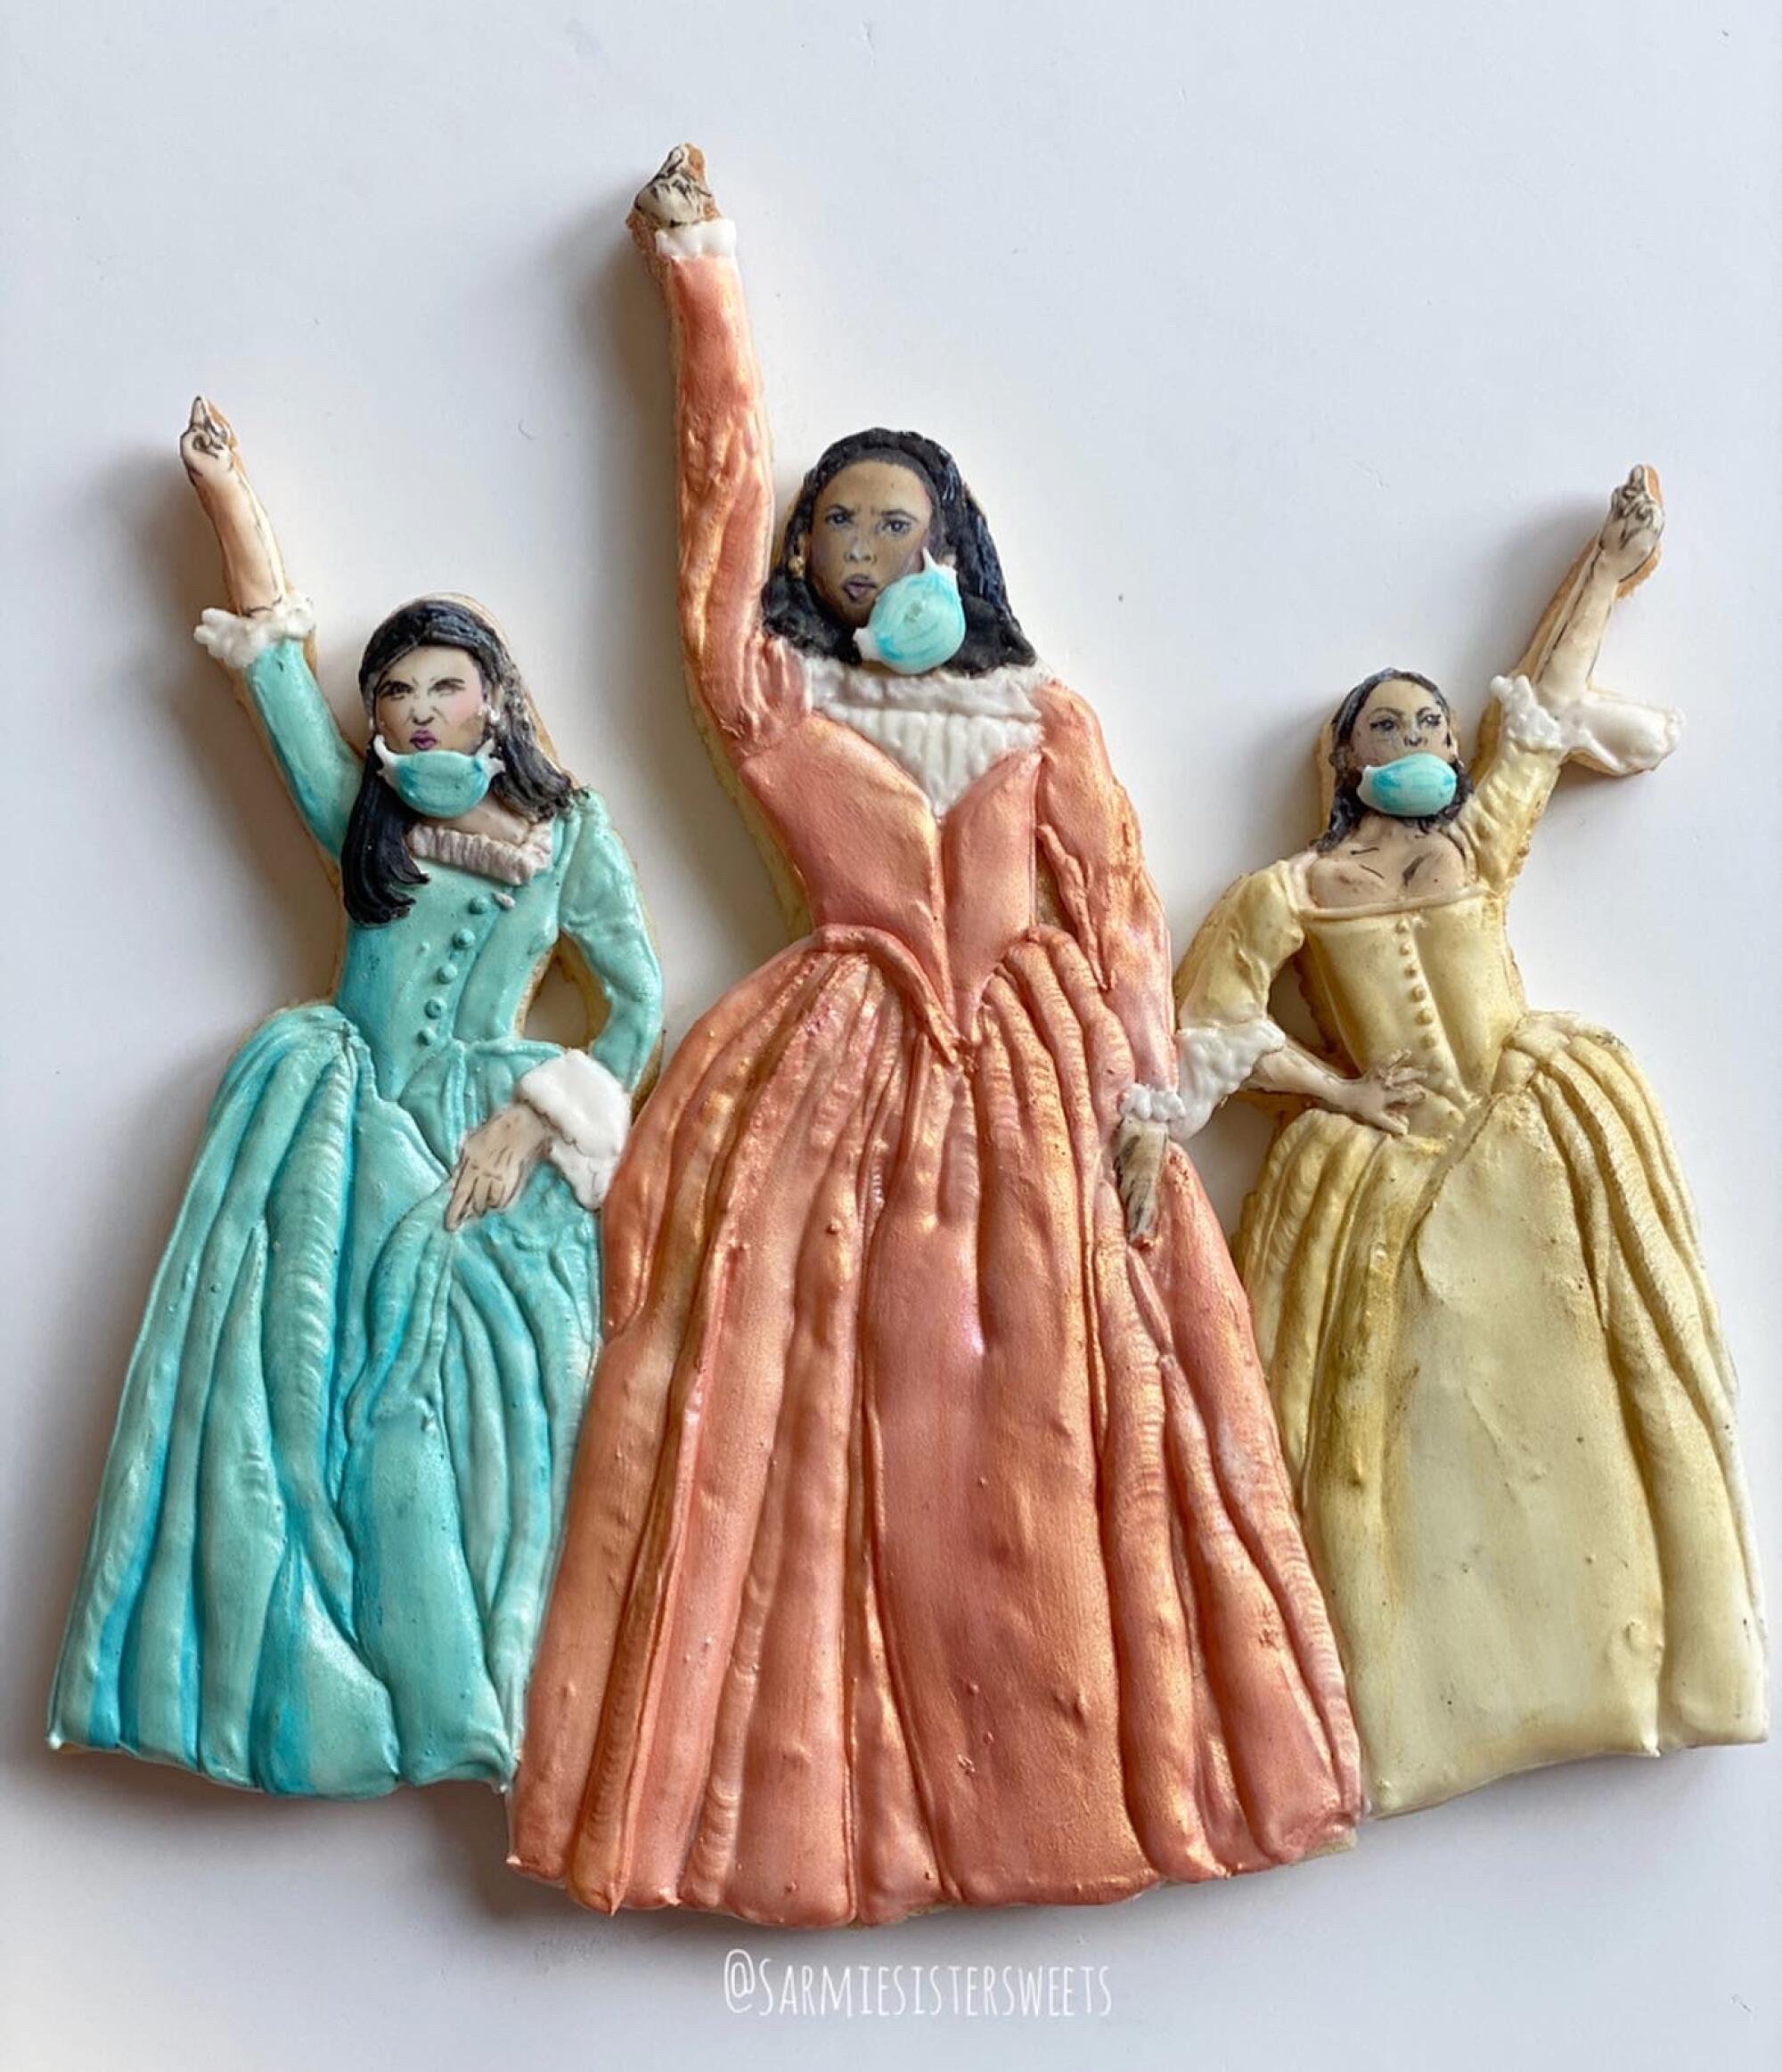 Cookies shaped like the Schuyler sisters, from the musical "Hamilton," in masks